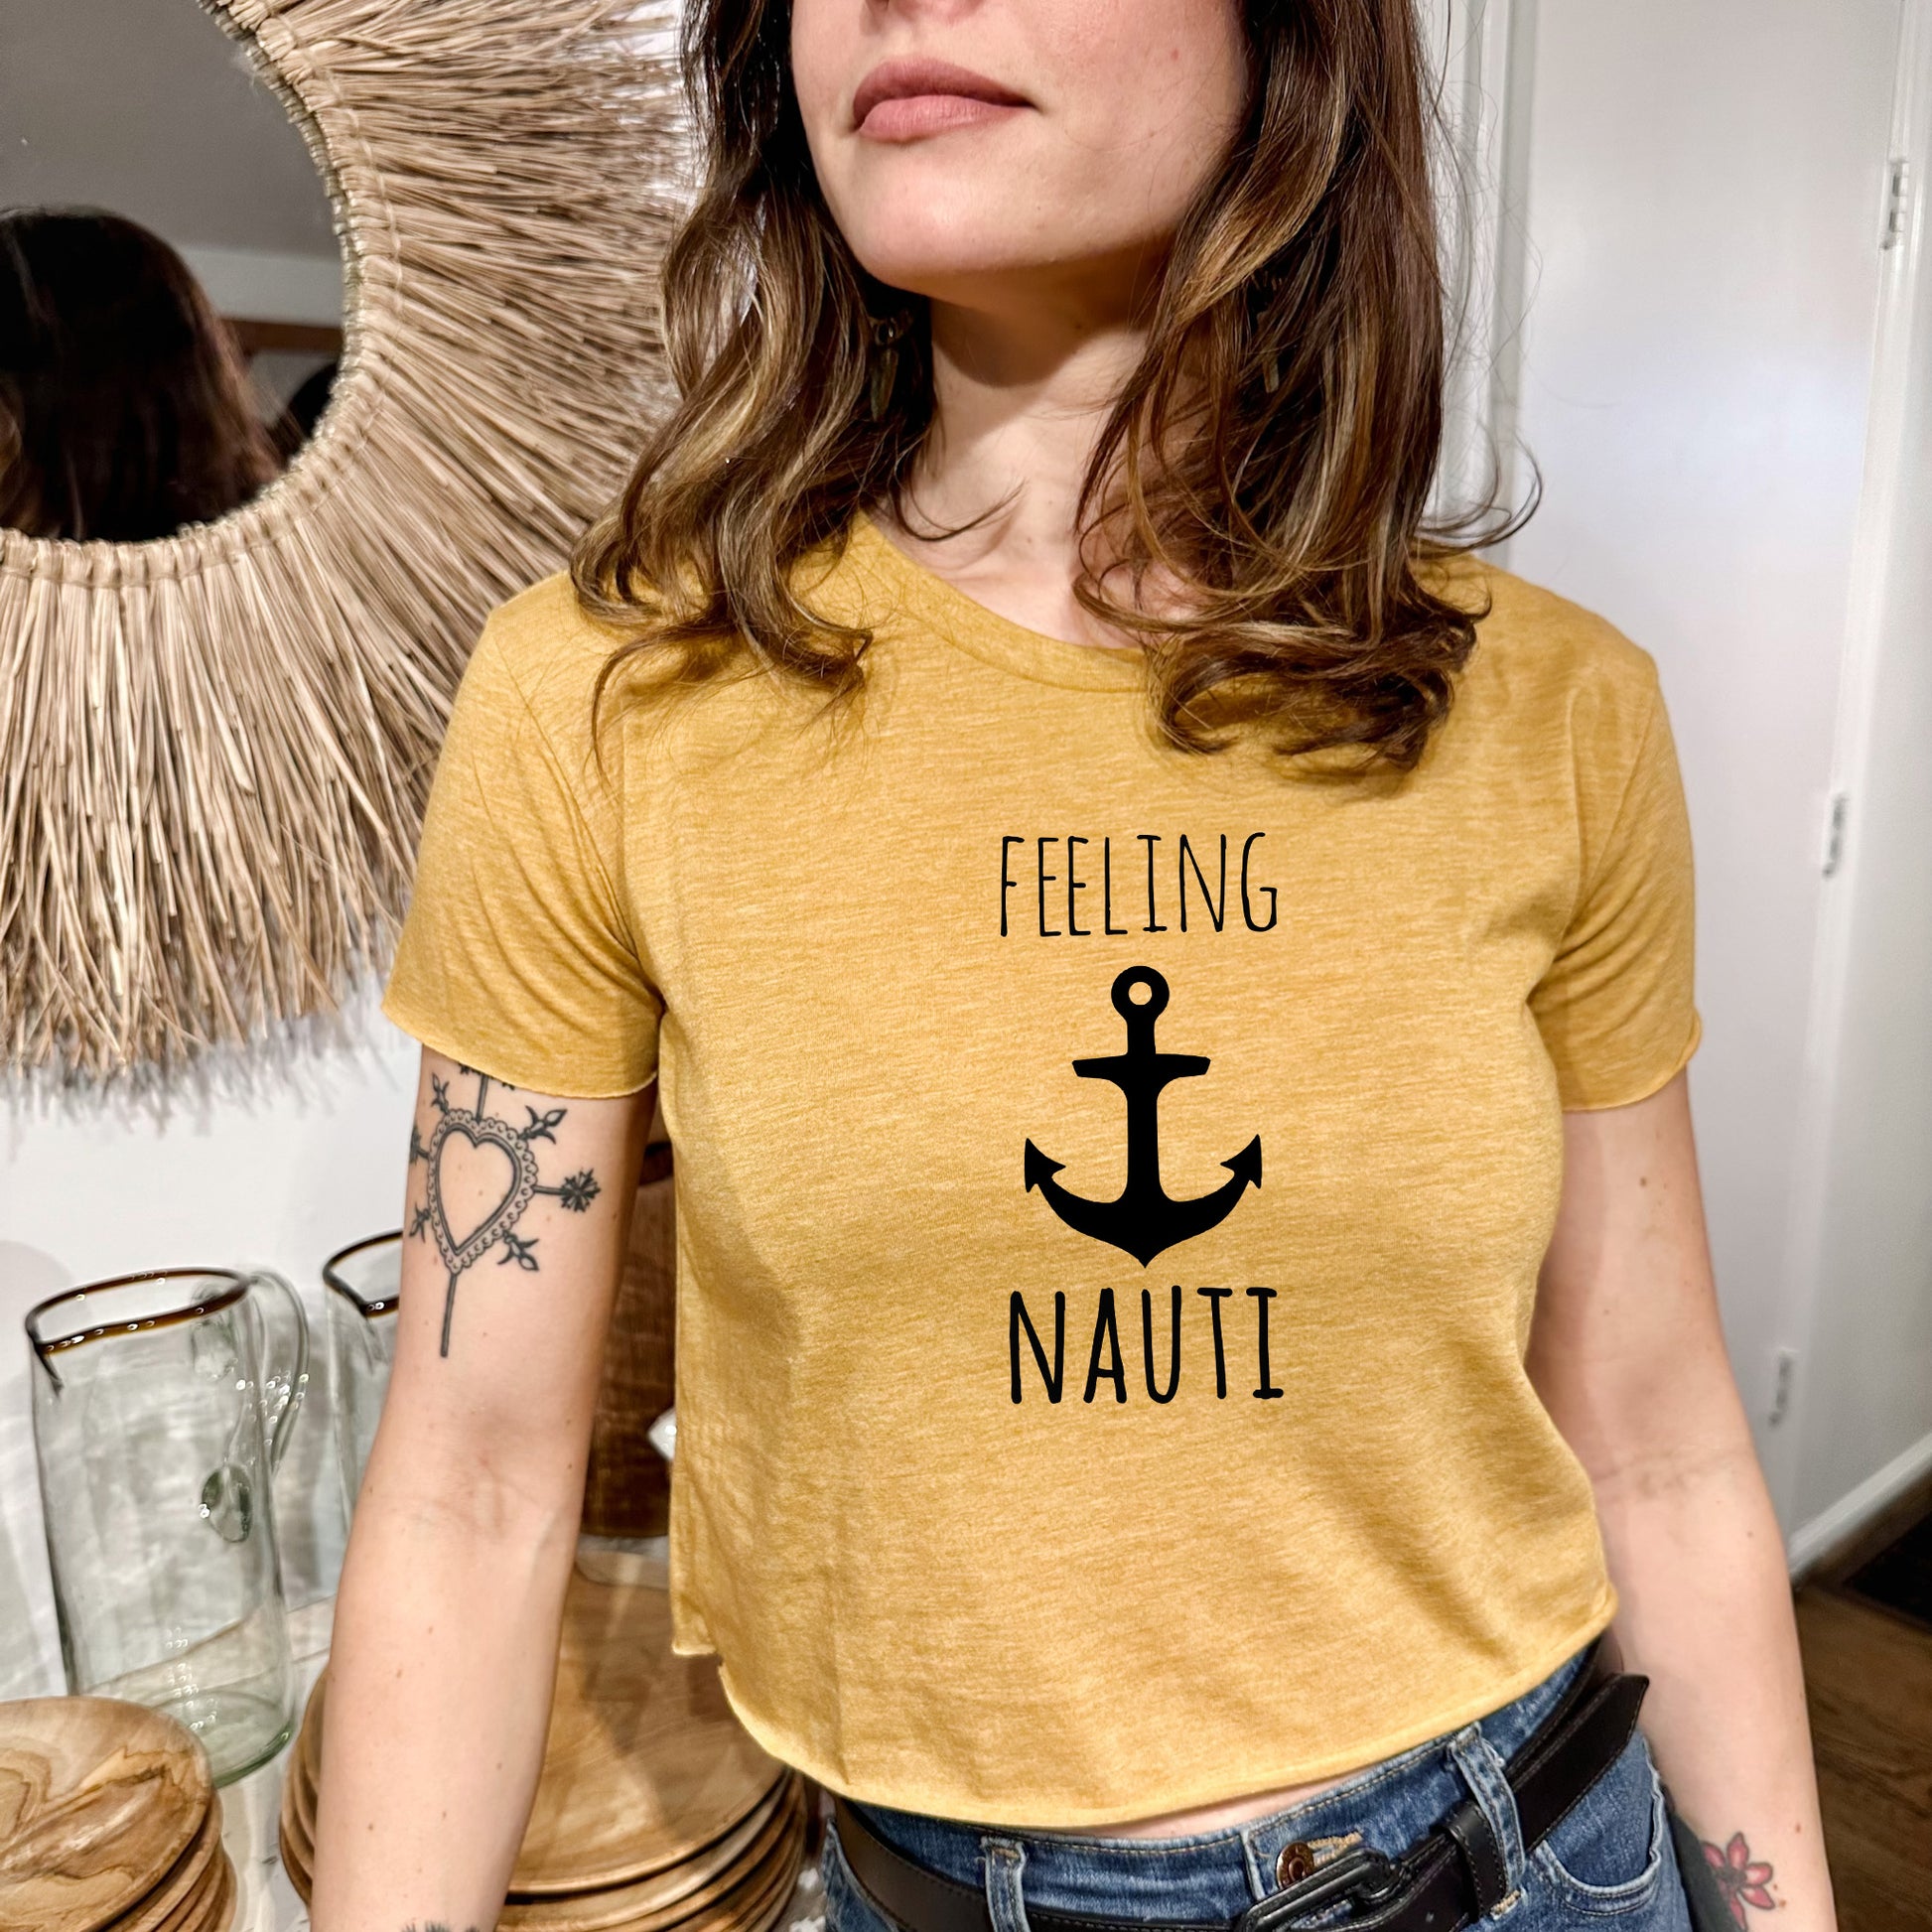 a woman wearing a yellow shirt with a black anchor on it